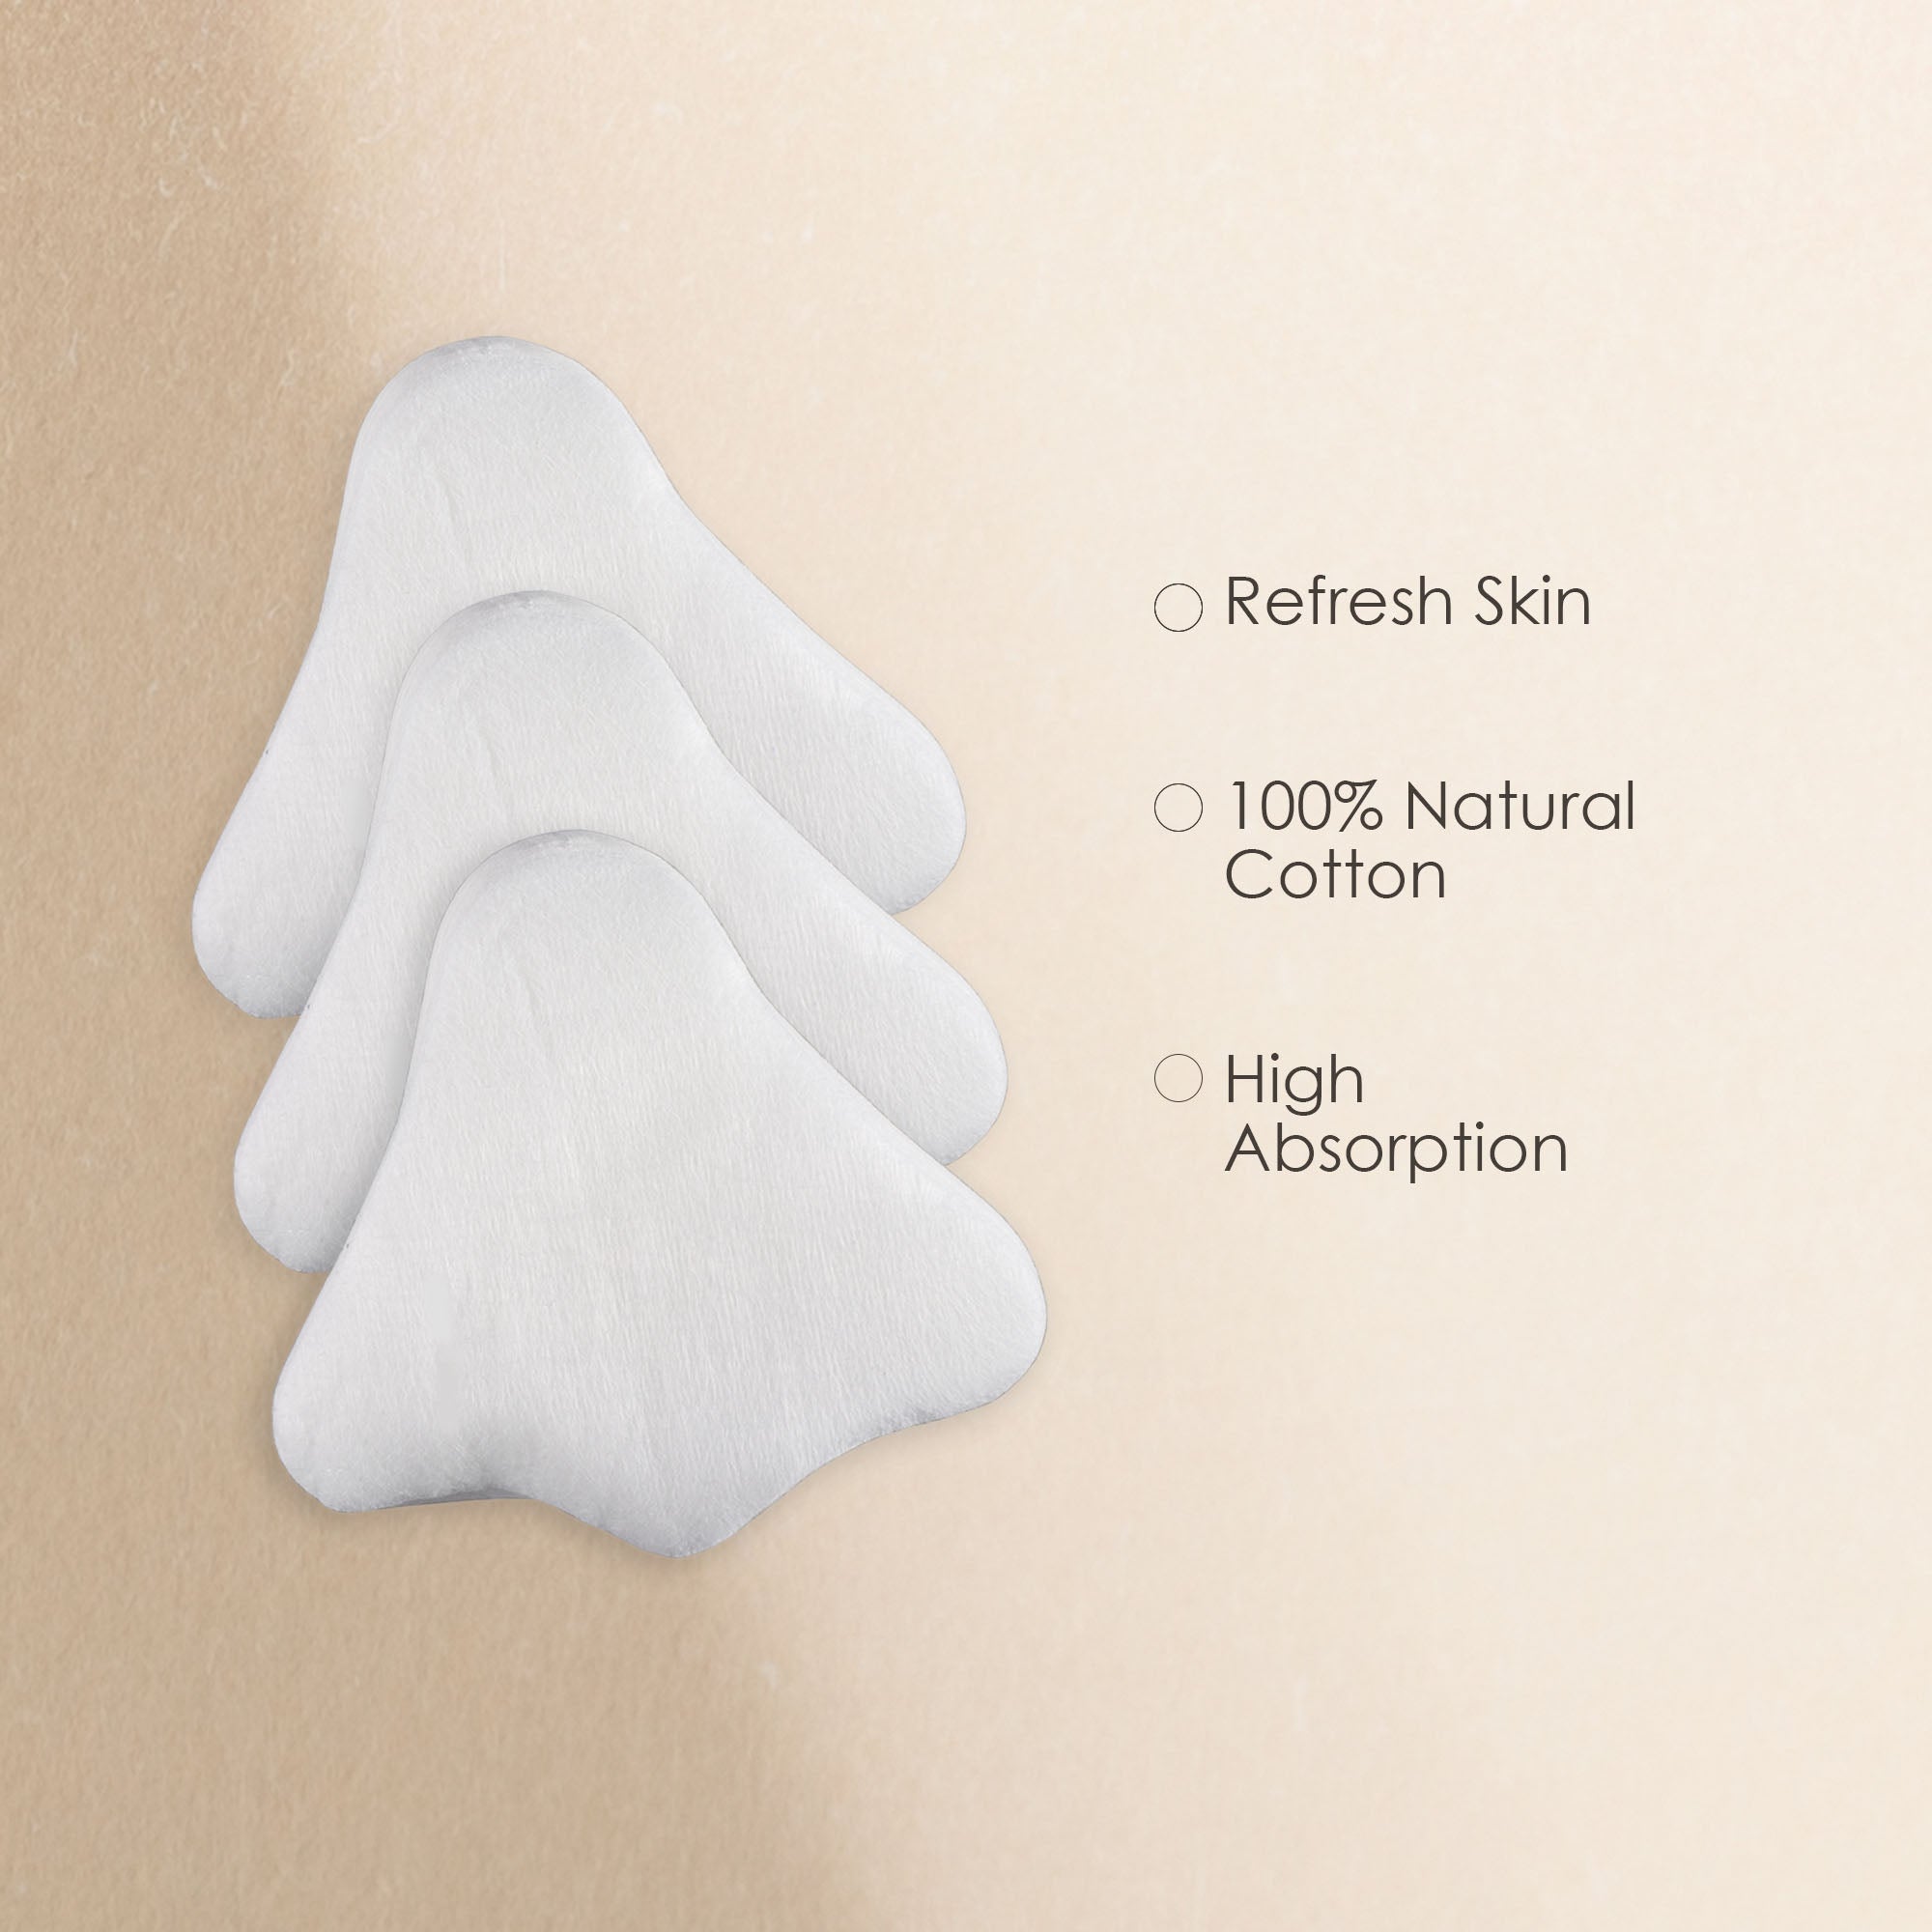 100pcs Non-woven Cotton Pads Disposable DIY Cosmetic Facial Skin Care Nose Mask Sheet Toner Lotion Paper (Nose Shaped)